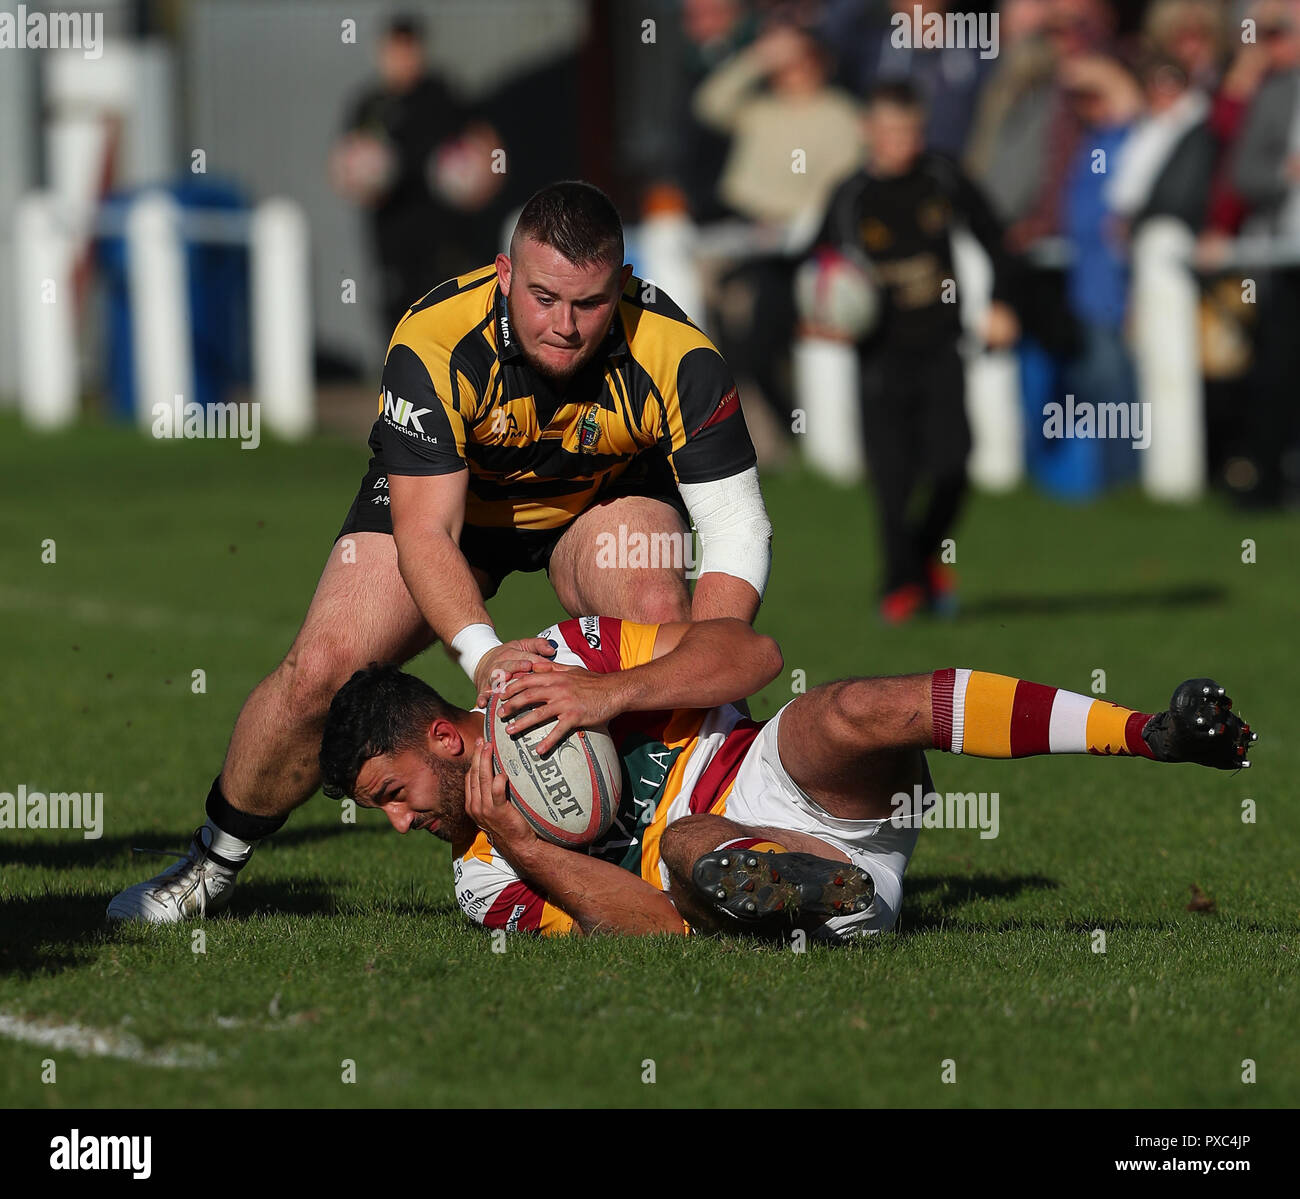 20.10.2018 Hinckley, Leicester, England. Rugby Union, Hinckley rfc v Fylde rfc.   Oscar Harper in action for Hinckley during the RFU National League 2 North (NL2N) game played at the Leicester  Road Stadium.    © Phil Hutchinson / Alamy Live News Stock Photo